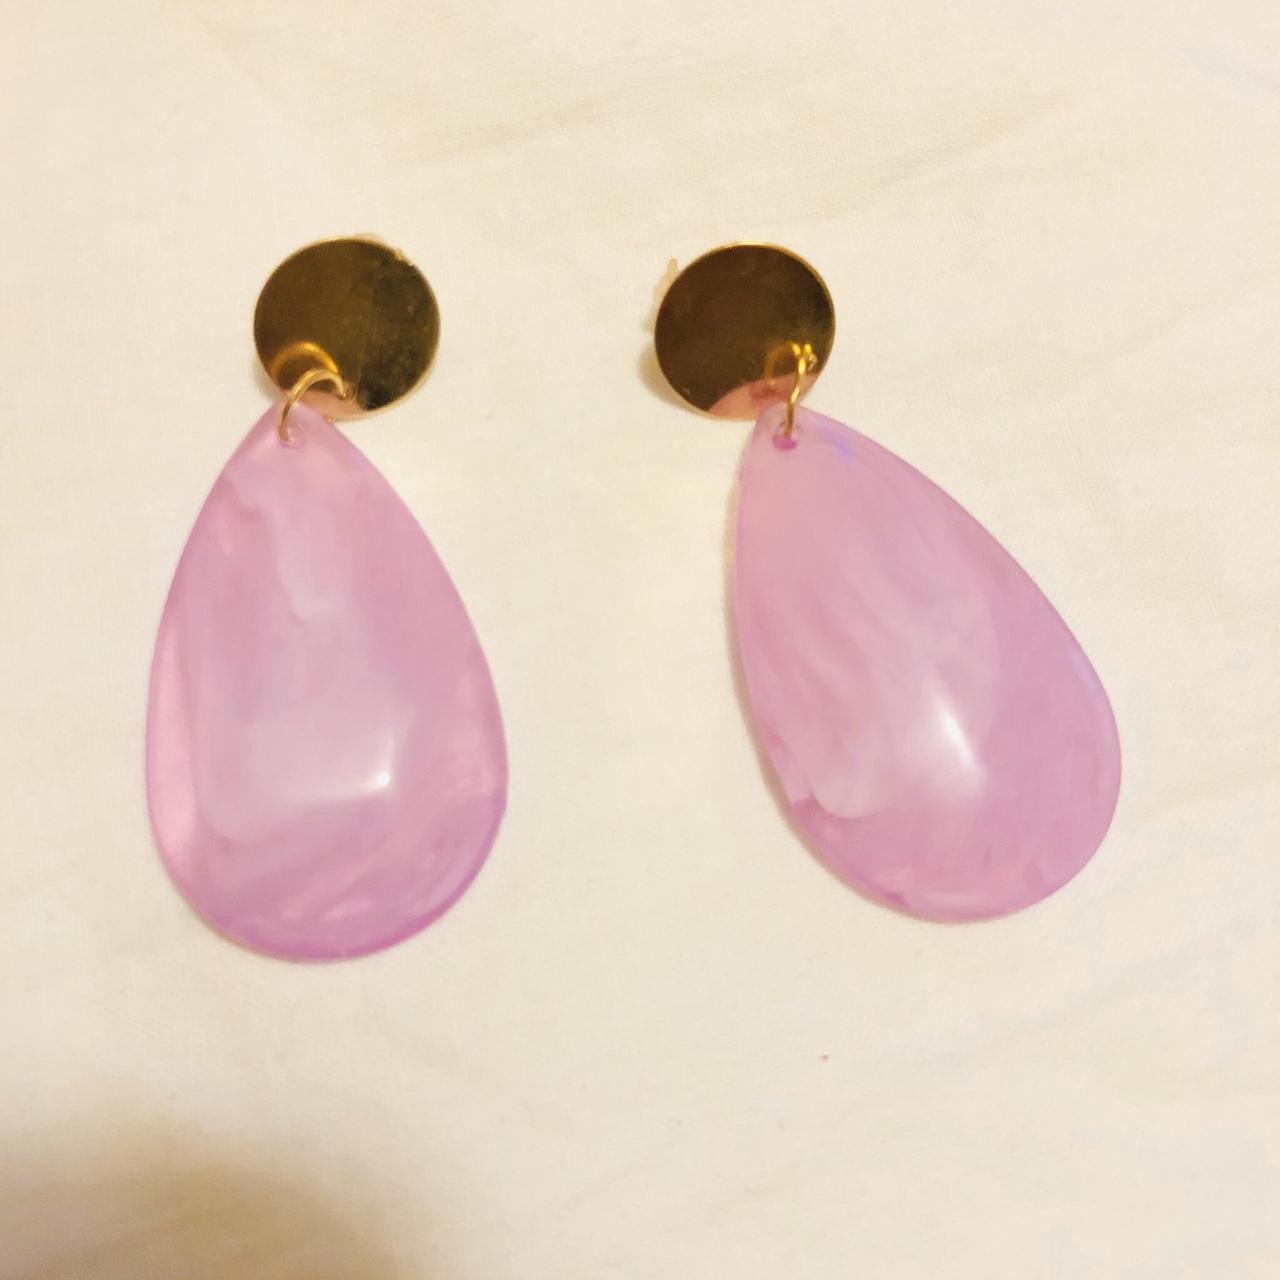 Product Image 3 - Pink glass earrings